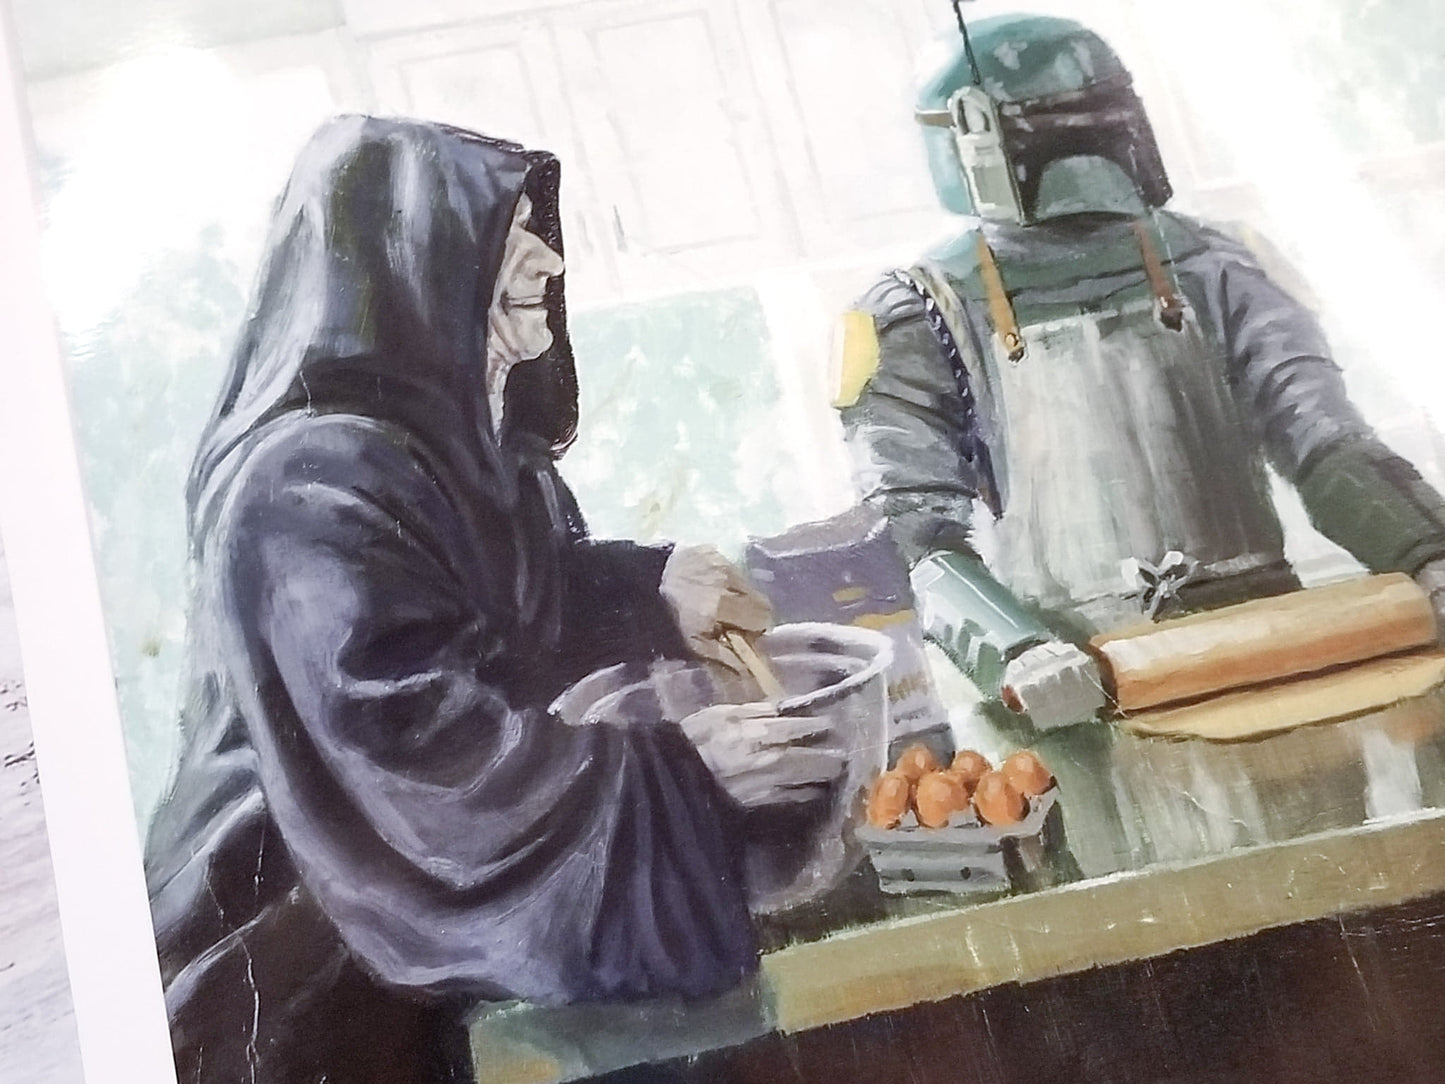 "Imperial Baking Party"  Parody Art Print by Bucket Art   Details to Enjoy:  The Emperor is wearing Crocs, Vader is wearing "Hufflepuff" apron from Harry Potter (Who knew that was his house?!), The cheerful Skywalker family portrait in background, Han Solo frozen in carbonite is the refrigerator,  The kitchen lights are mini death stars.